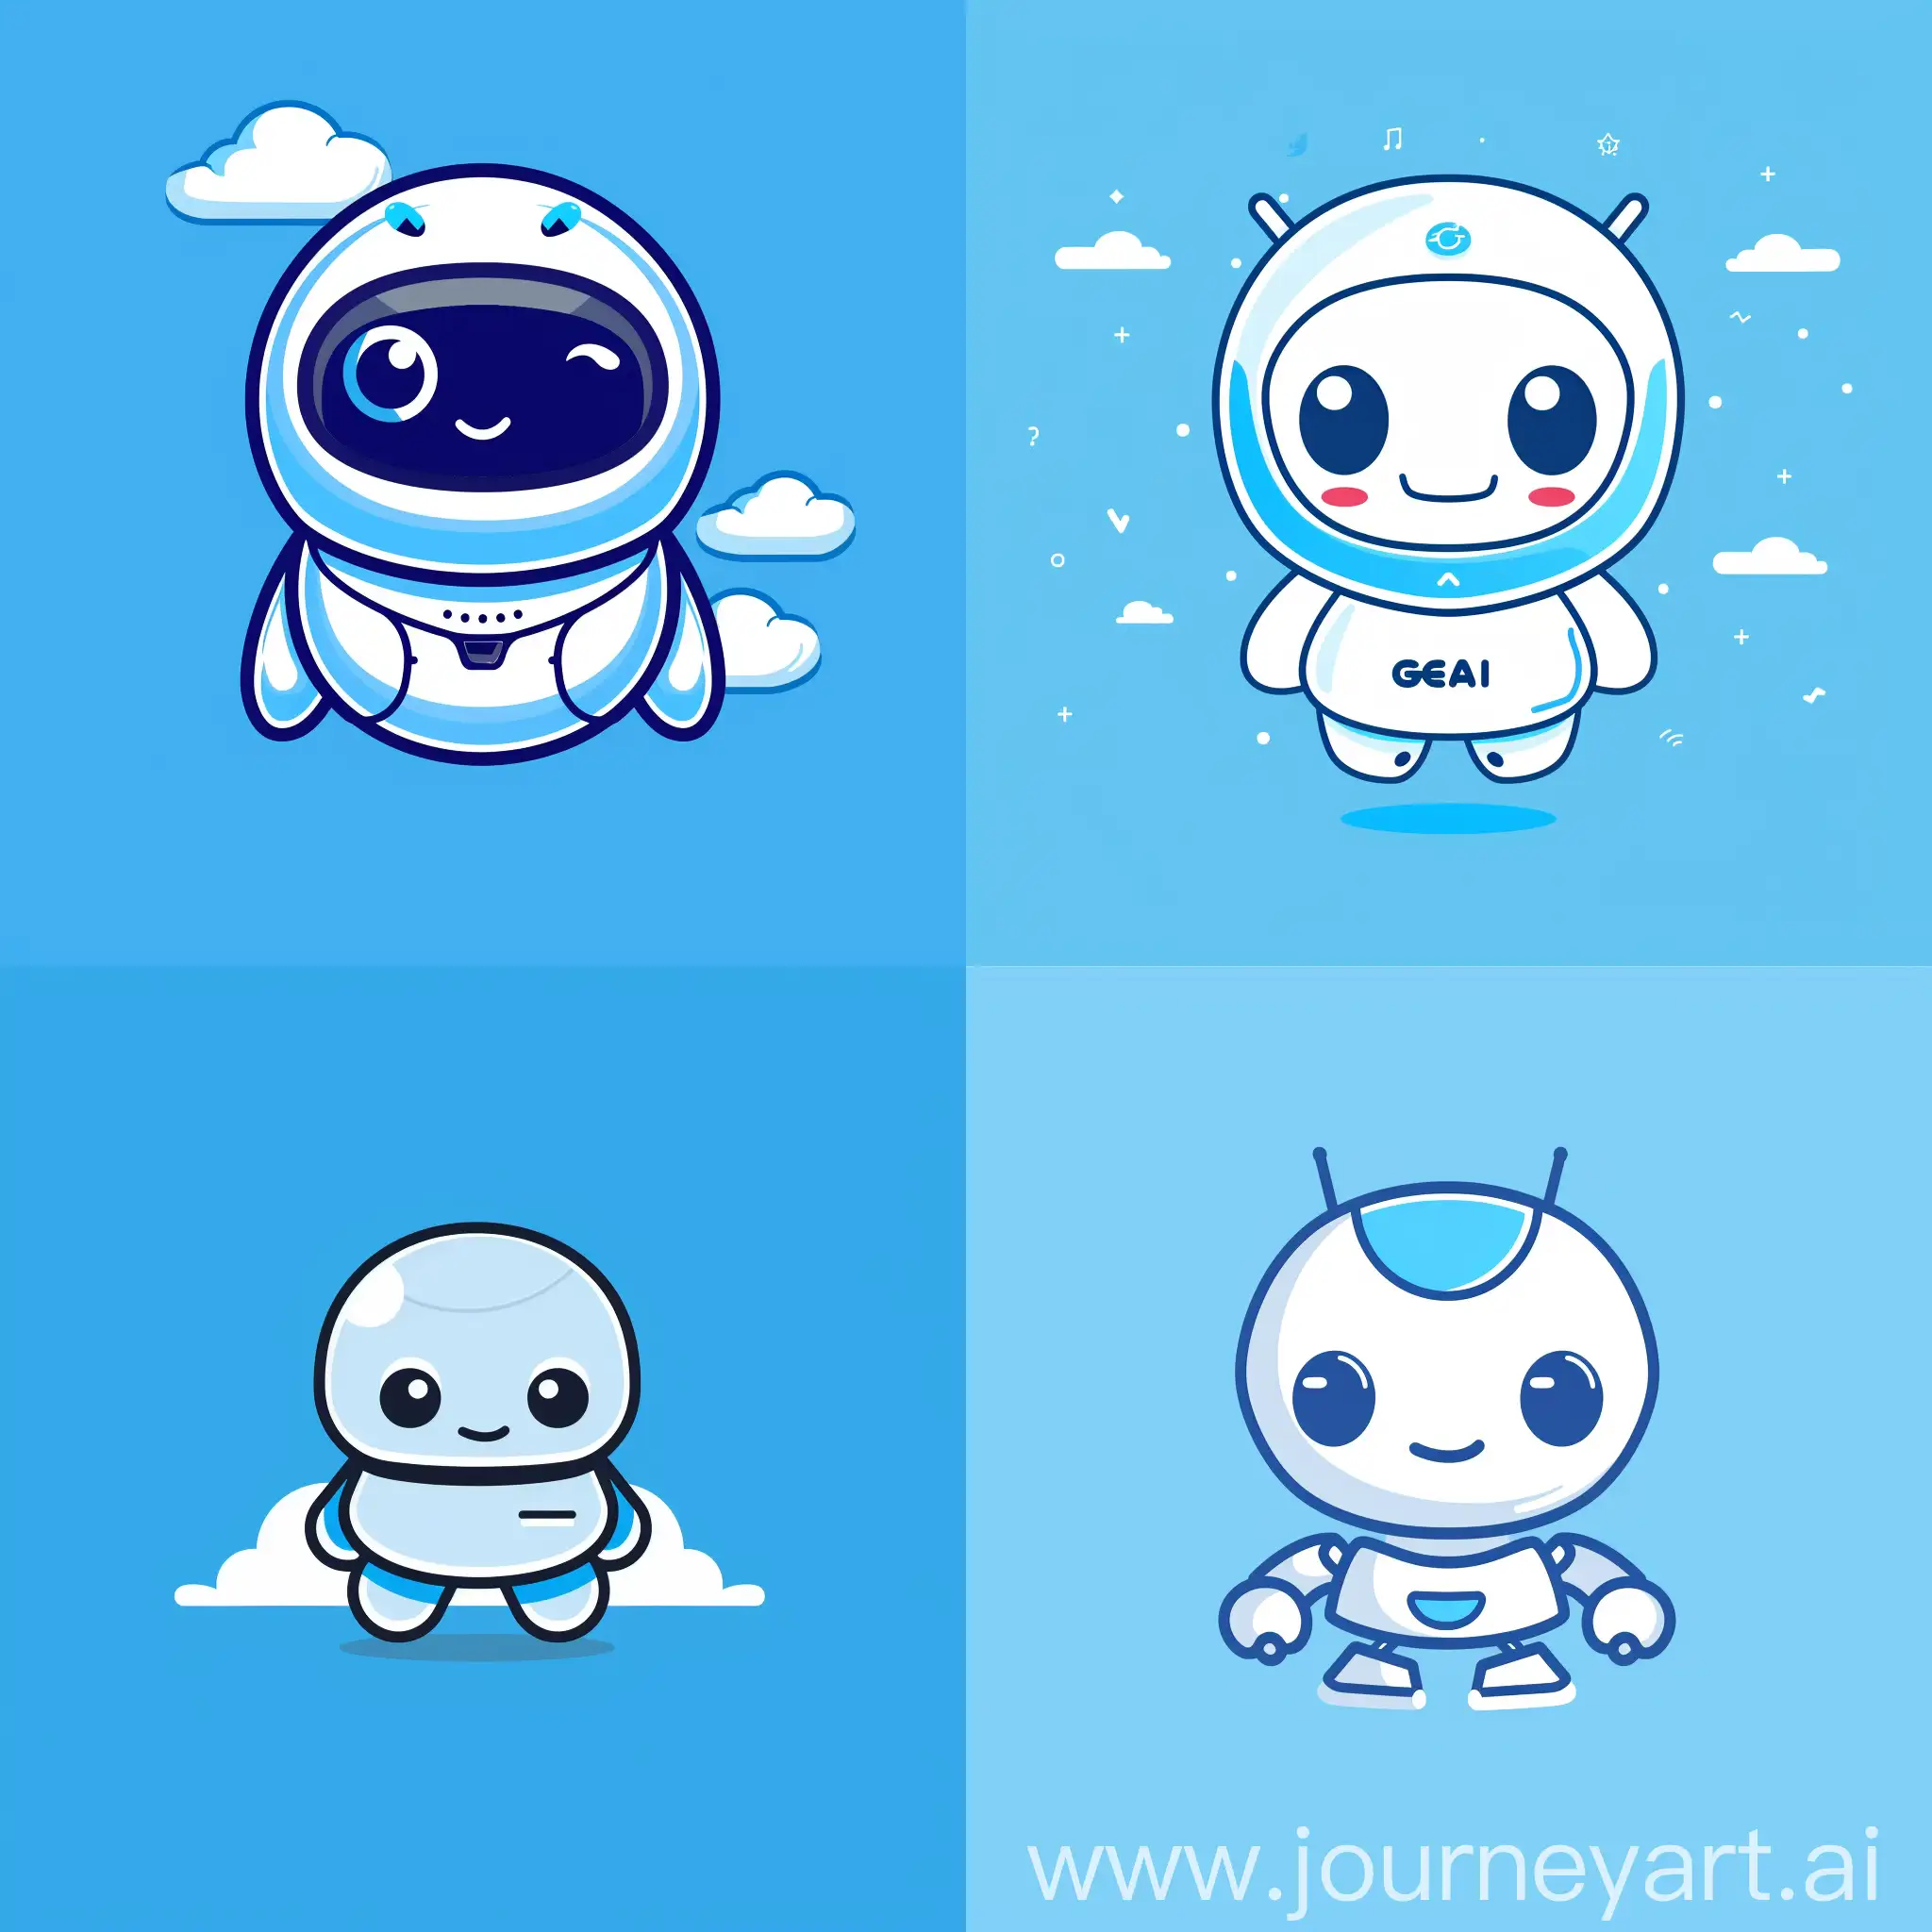 I want you to come up with a logo for my bot, here is the info about the bot, give me atleast 4 type of options and Use sky blue background only. make it very minimalistic and cute

Info: Build a large user base by offering GenAI tools and services directly on Telegram. Focused on quality service, great assistance, and excellent branding :